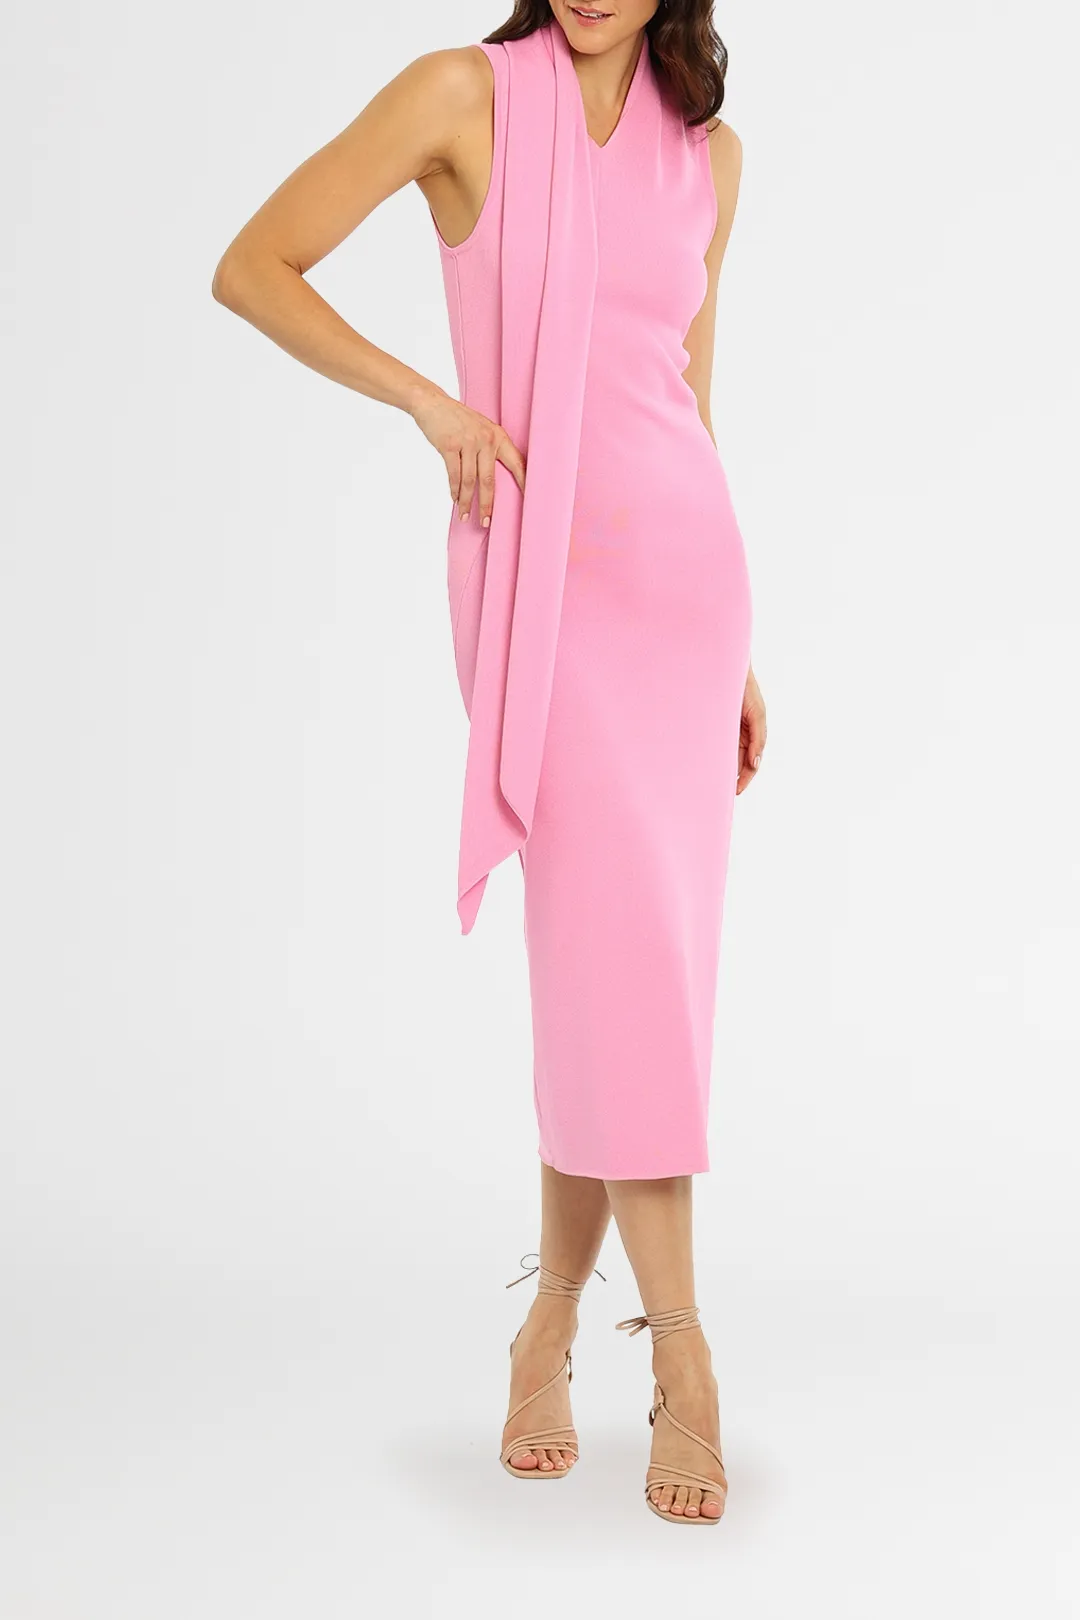 Aster Dress Pink by Acler for wedding guests